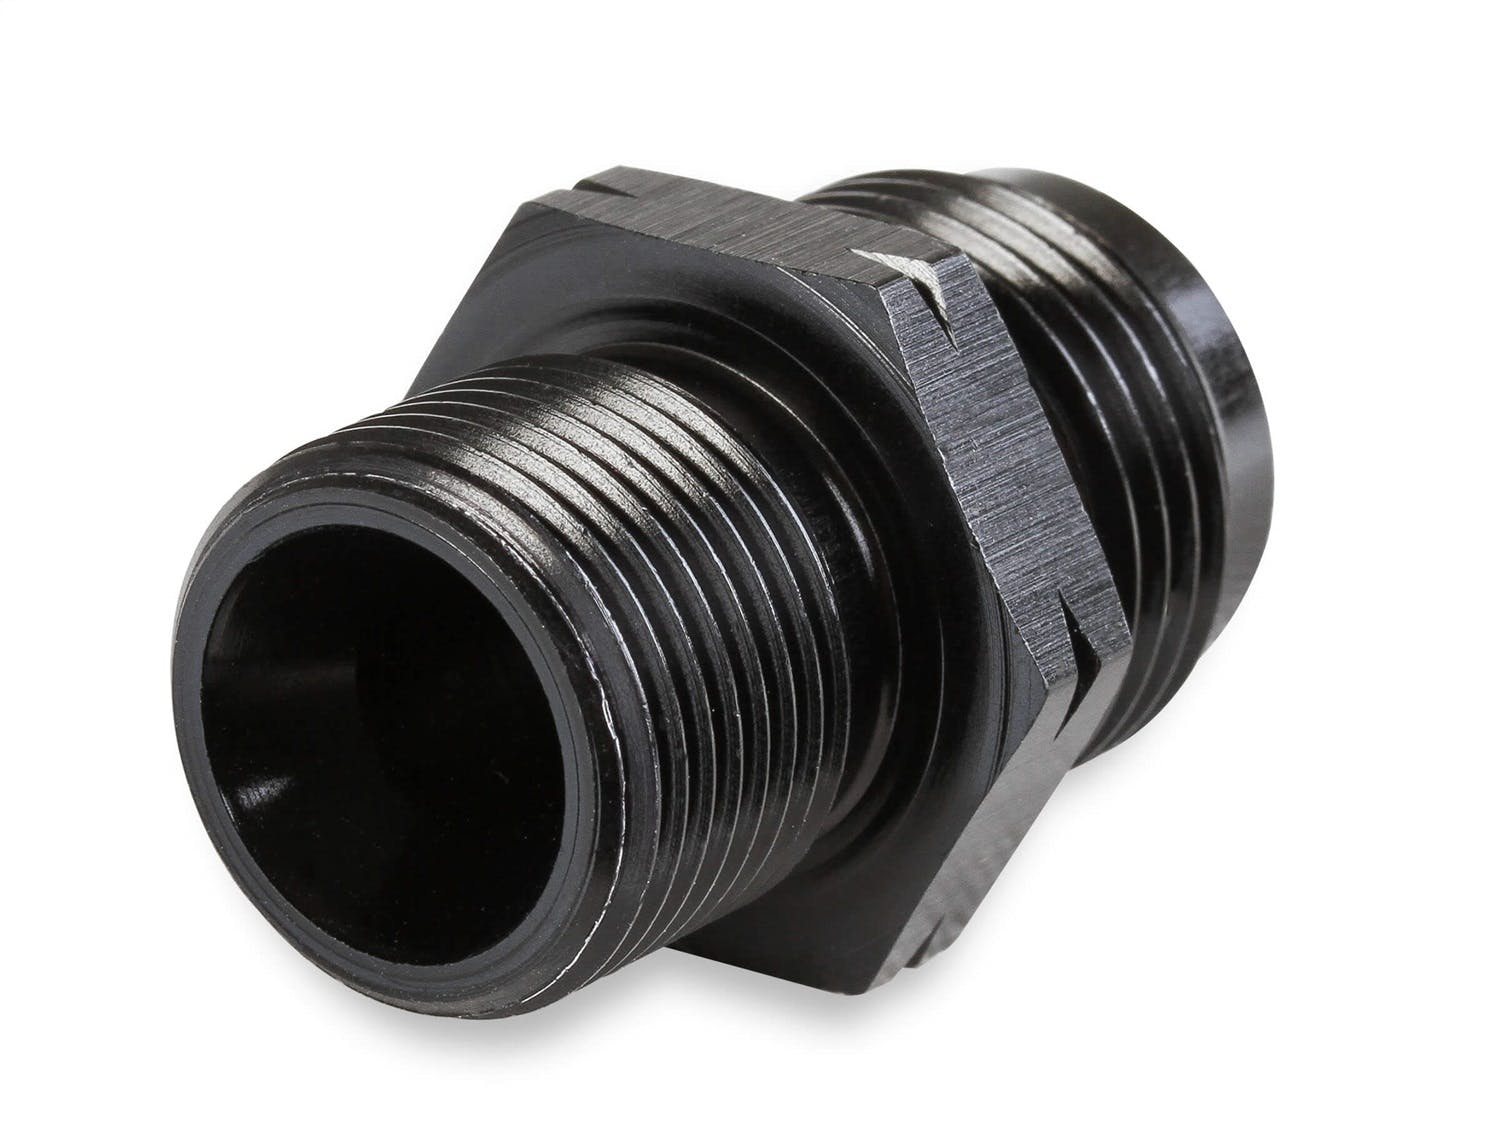 Earl's Performance Plumbing -8AN to 12MM x 1.5 Adapter Fitting AT9919EFGERL